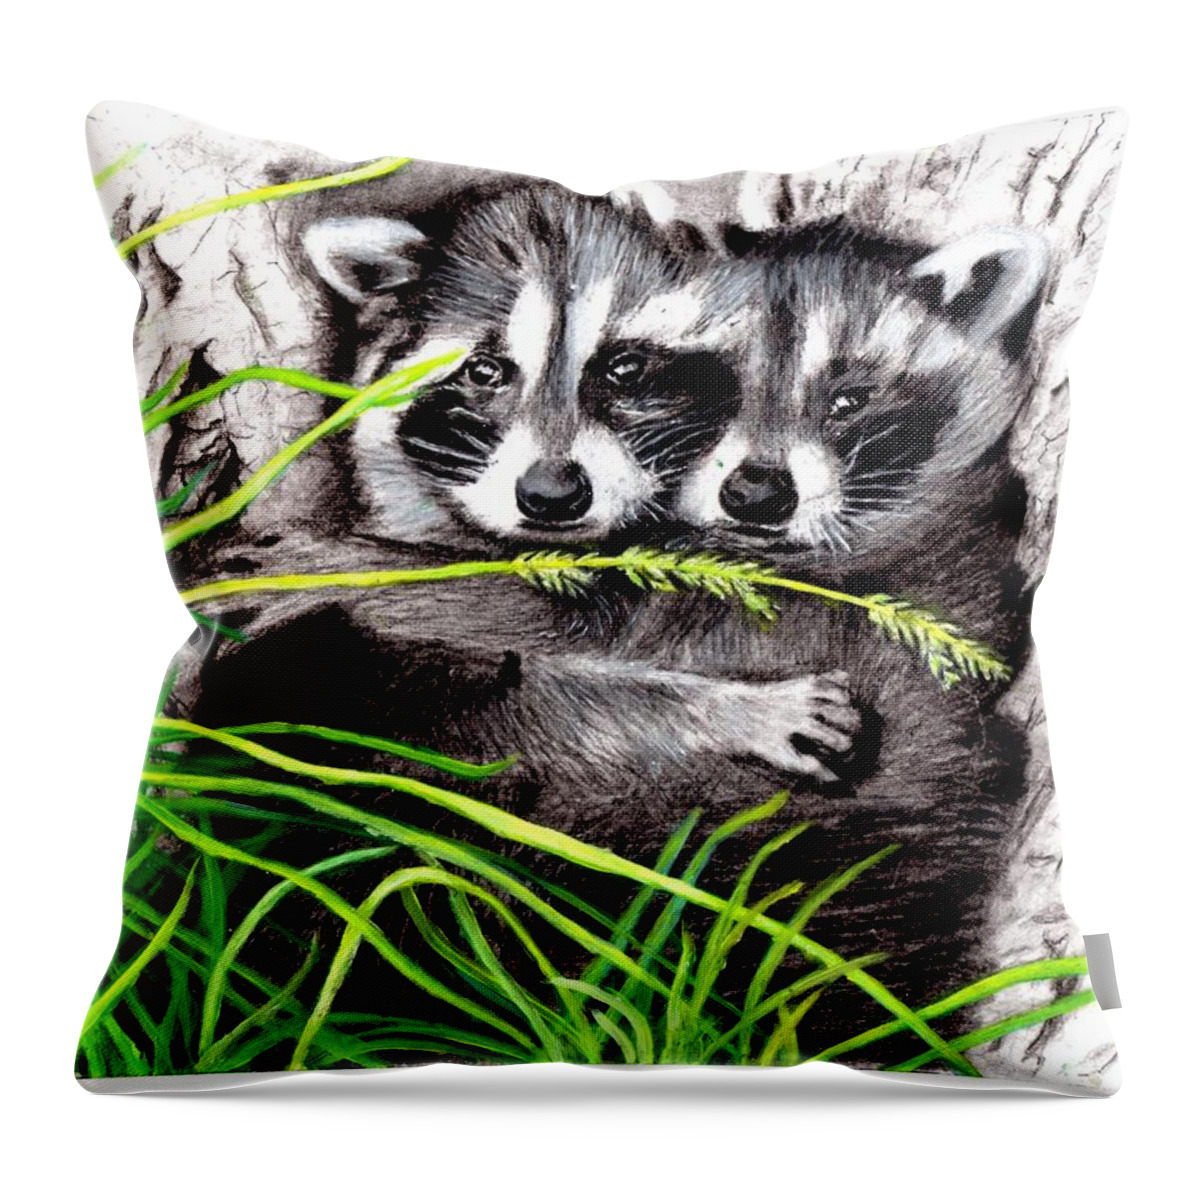 Racoons Throw Pillow featuring the drawing Hold Me Tight by Cassy Allsworth